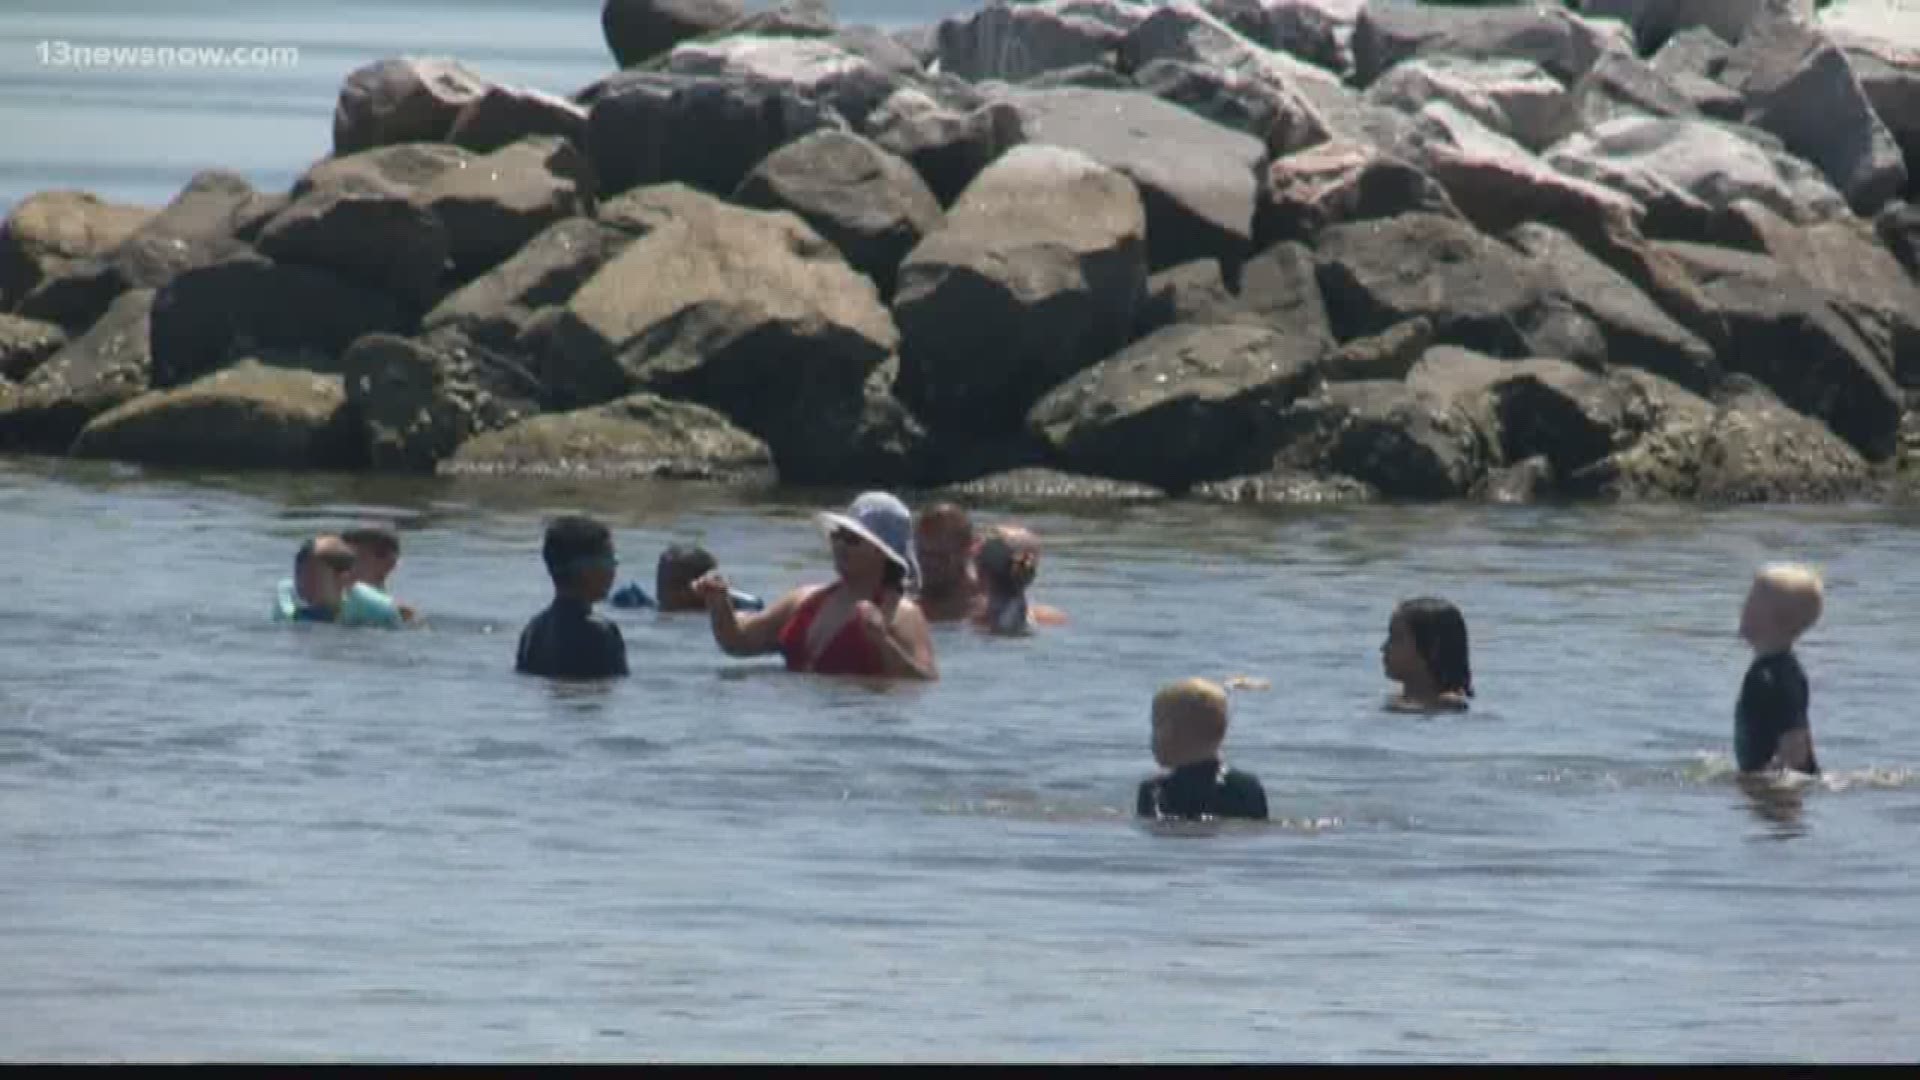 13News Now Evan Watson explains what city leaders are doing to keep beachgoers safe after a woman stepped on shark rocks in the water at Yorktown Beach.